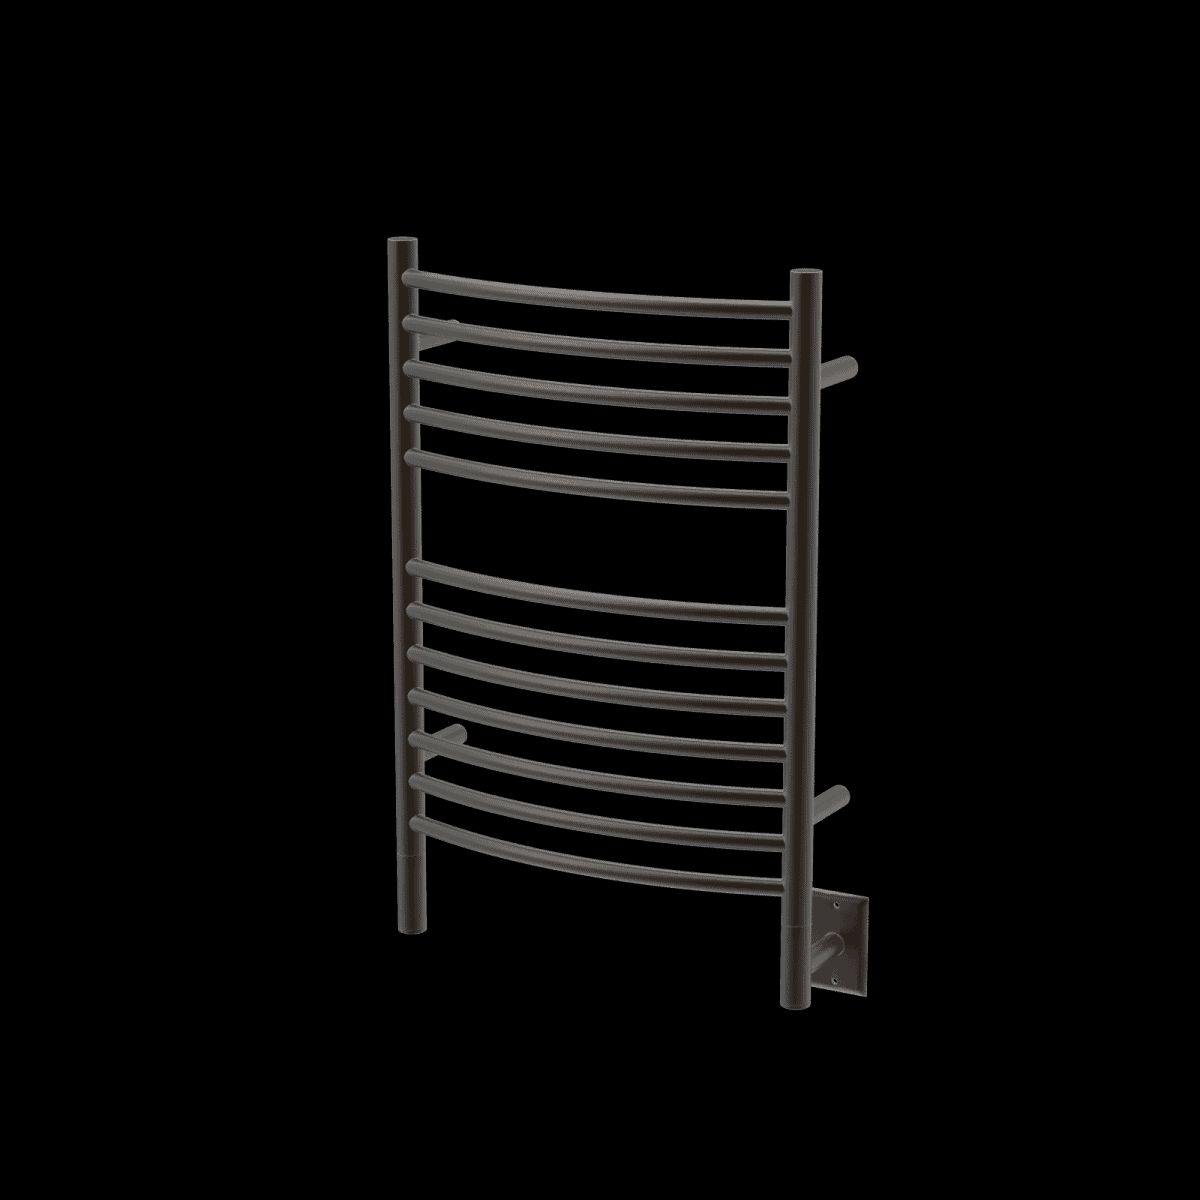 Amba ECO Model E Curved 12 Bar Hardwired Towel Warmer - Oil Rubbed Bronze